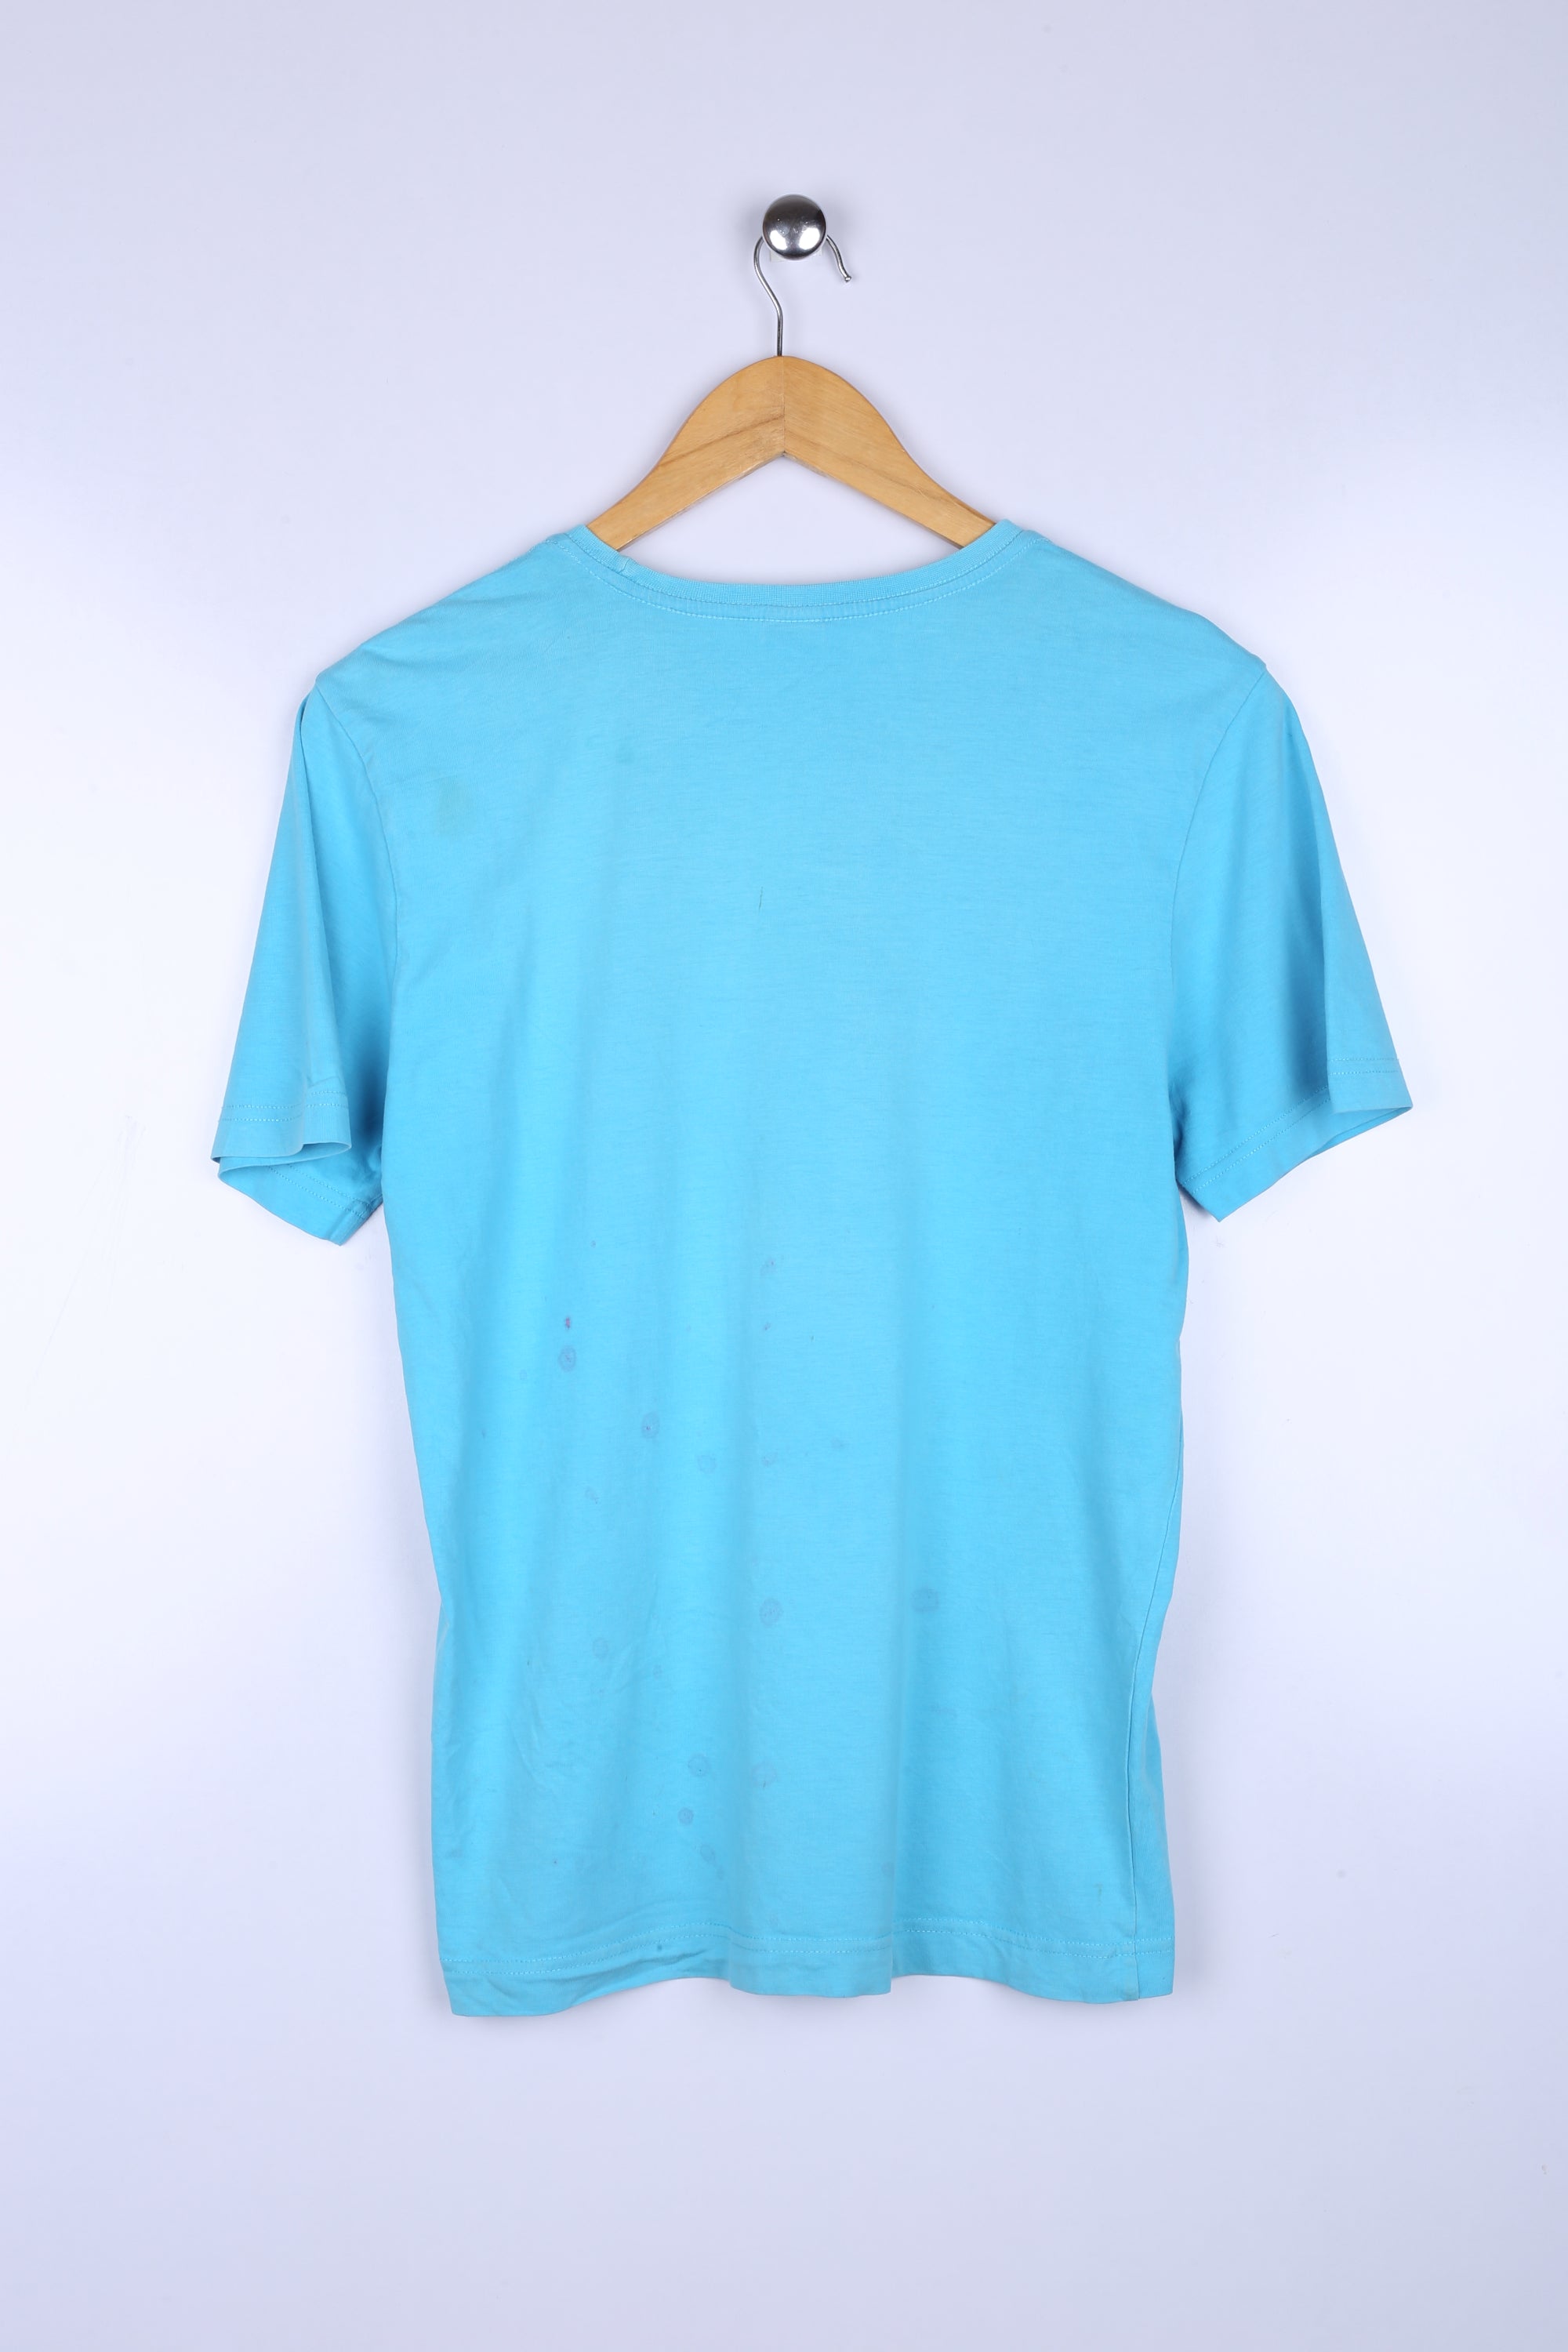 Vintage Surf Graphic Tee Skyblue